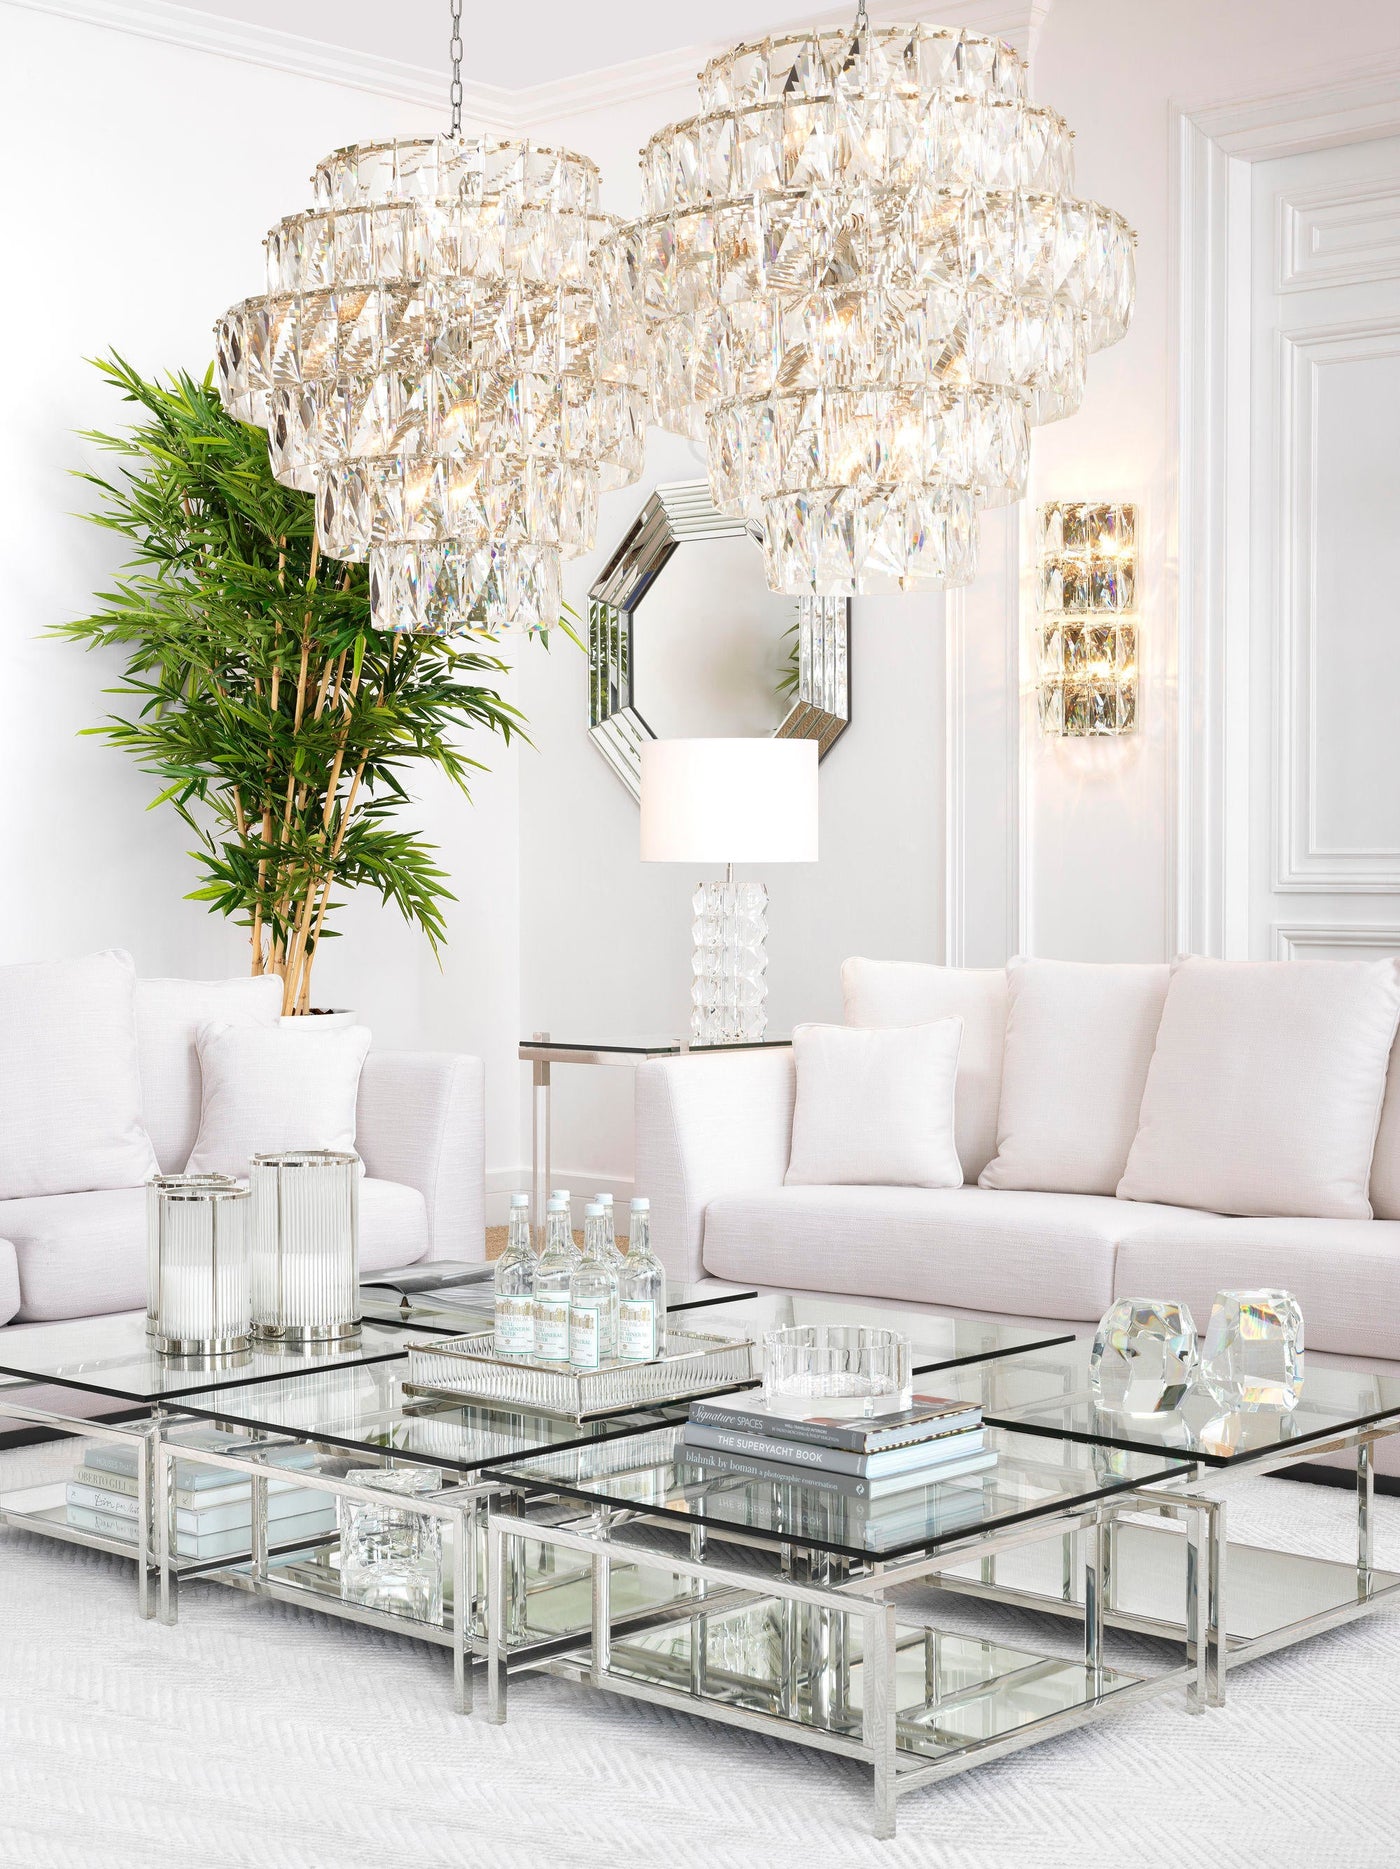 Eichholtz living room setting with elegant sofas, twin chandeliers, wall lights, mirror, glass and metal coffee tables and home accessories, styled to perfection.